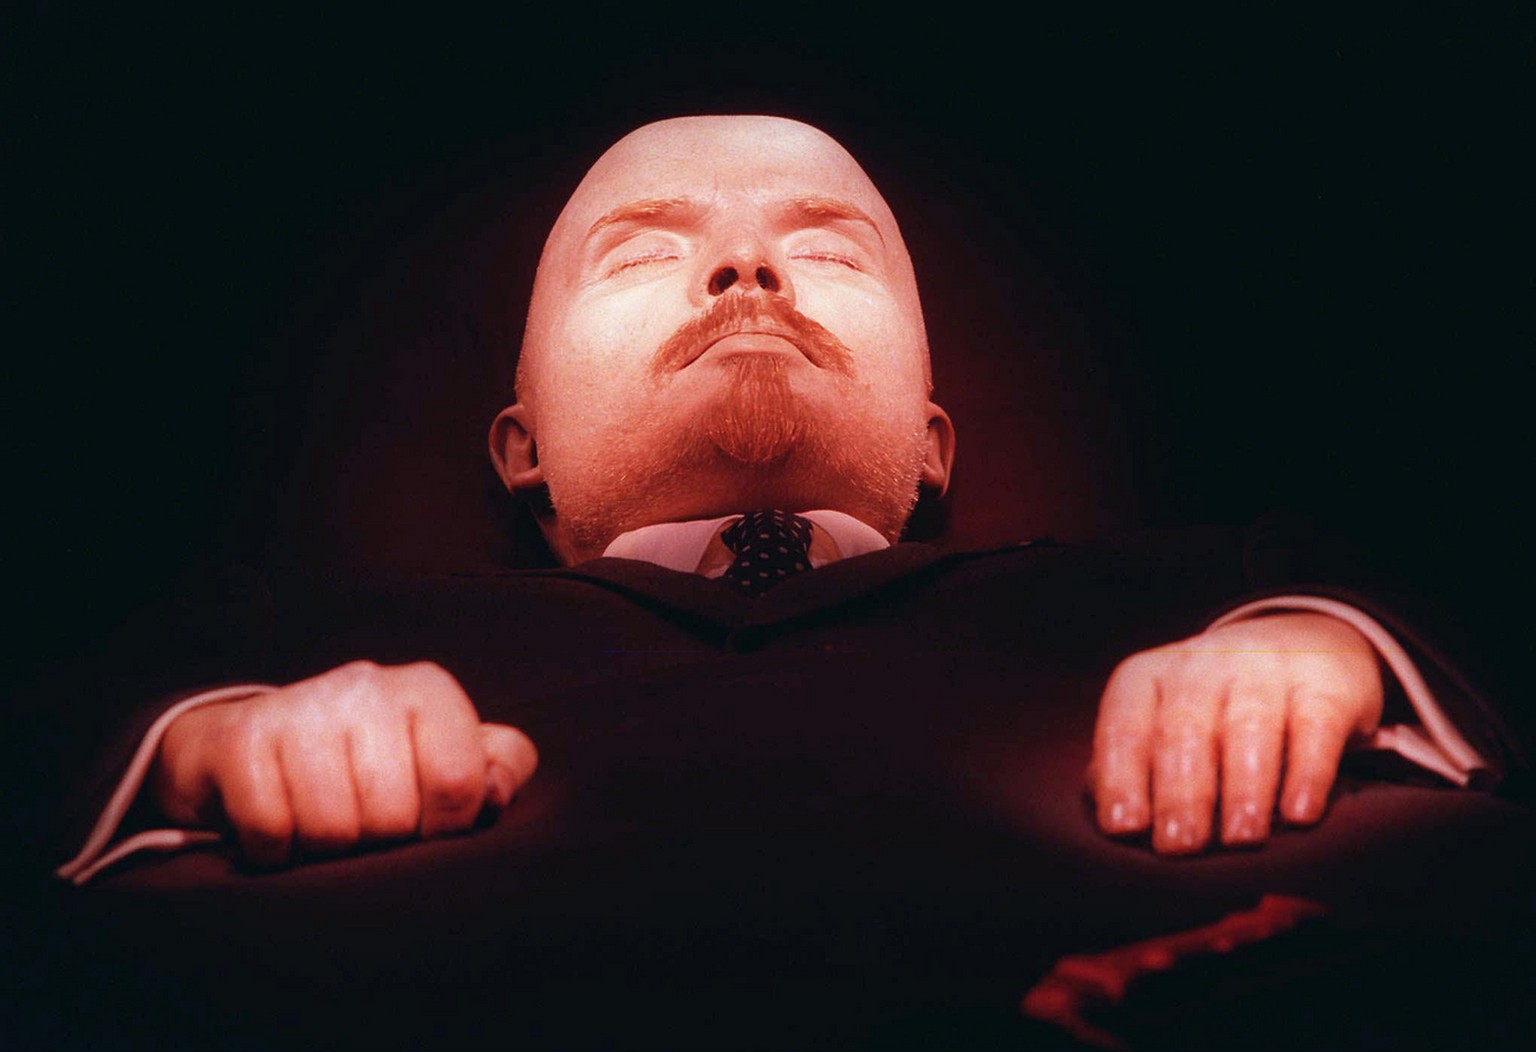 Vladimir Lenin, founder of the Soviet Union, lays embalmed in his tomb in Moscow's Red Square, Wednesday, April 16, 1997, six days before his 127th April 22 birthday. An influential Russian governor s ...